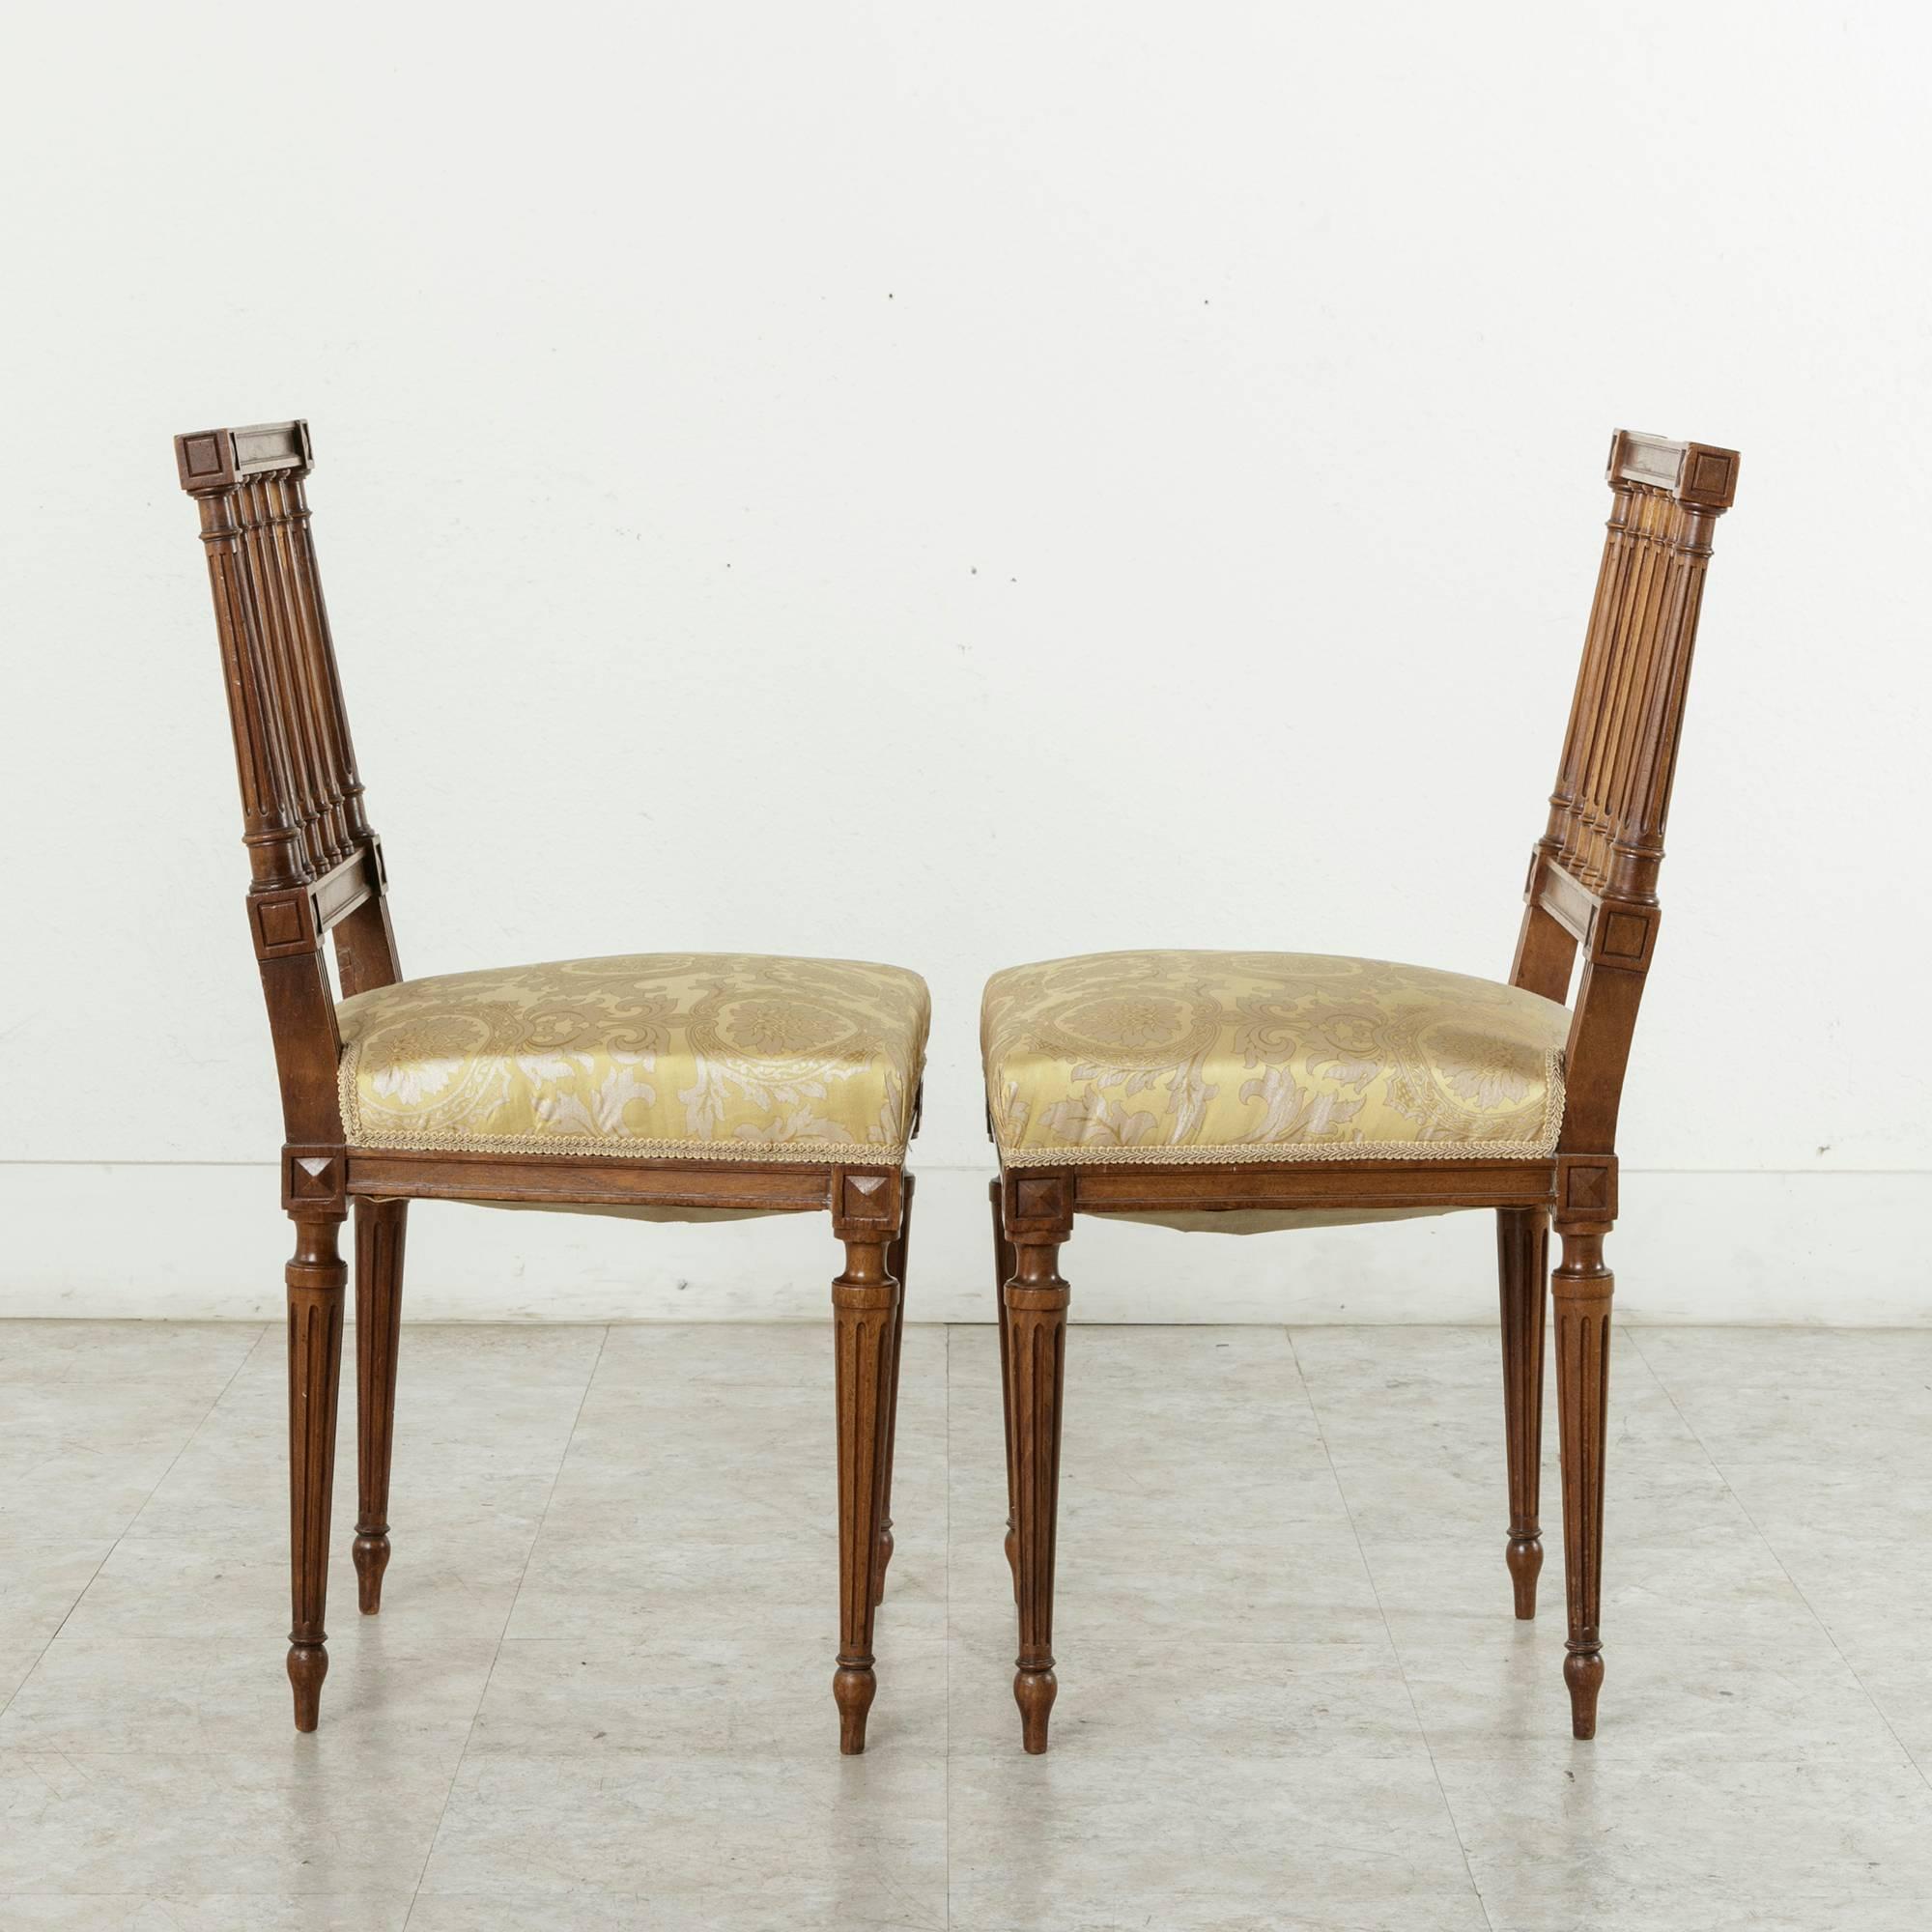 Pair of Late 19th Century French Hand-Carved Walnut Louis XVI Style Side Chairs 2